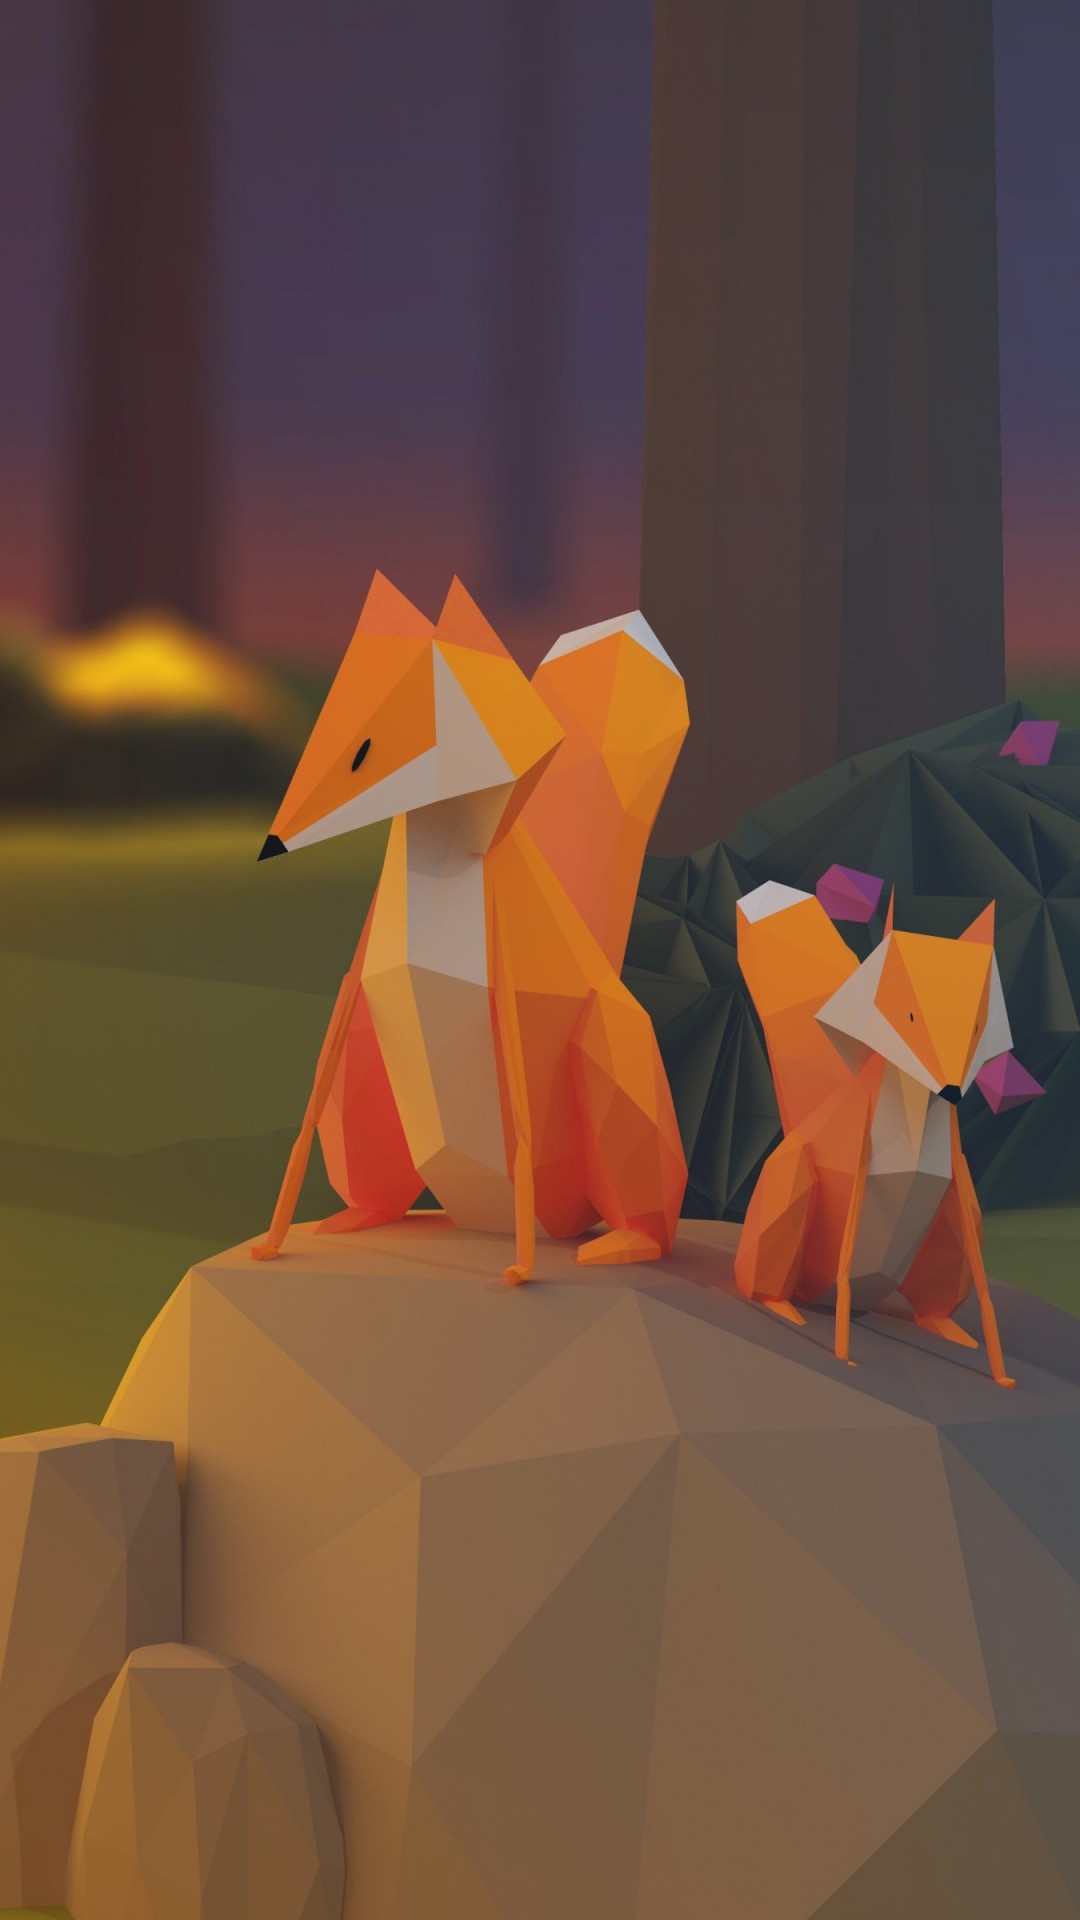 Low Poly Foxes Wallpaper for Google Nexus 5X